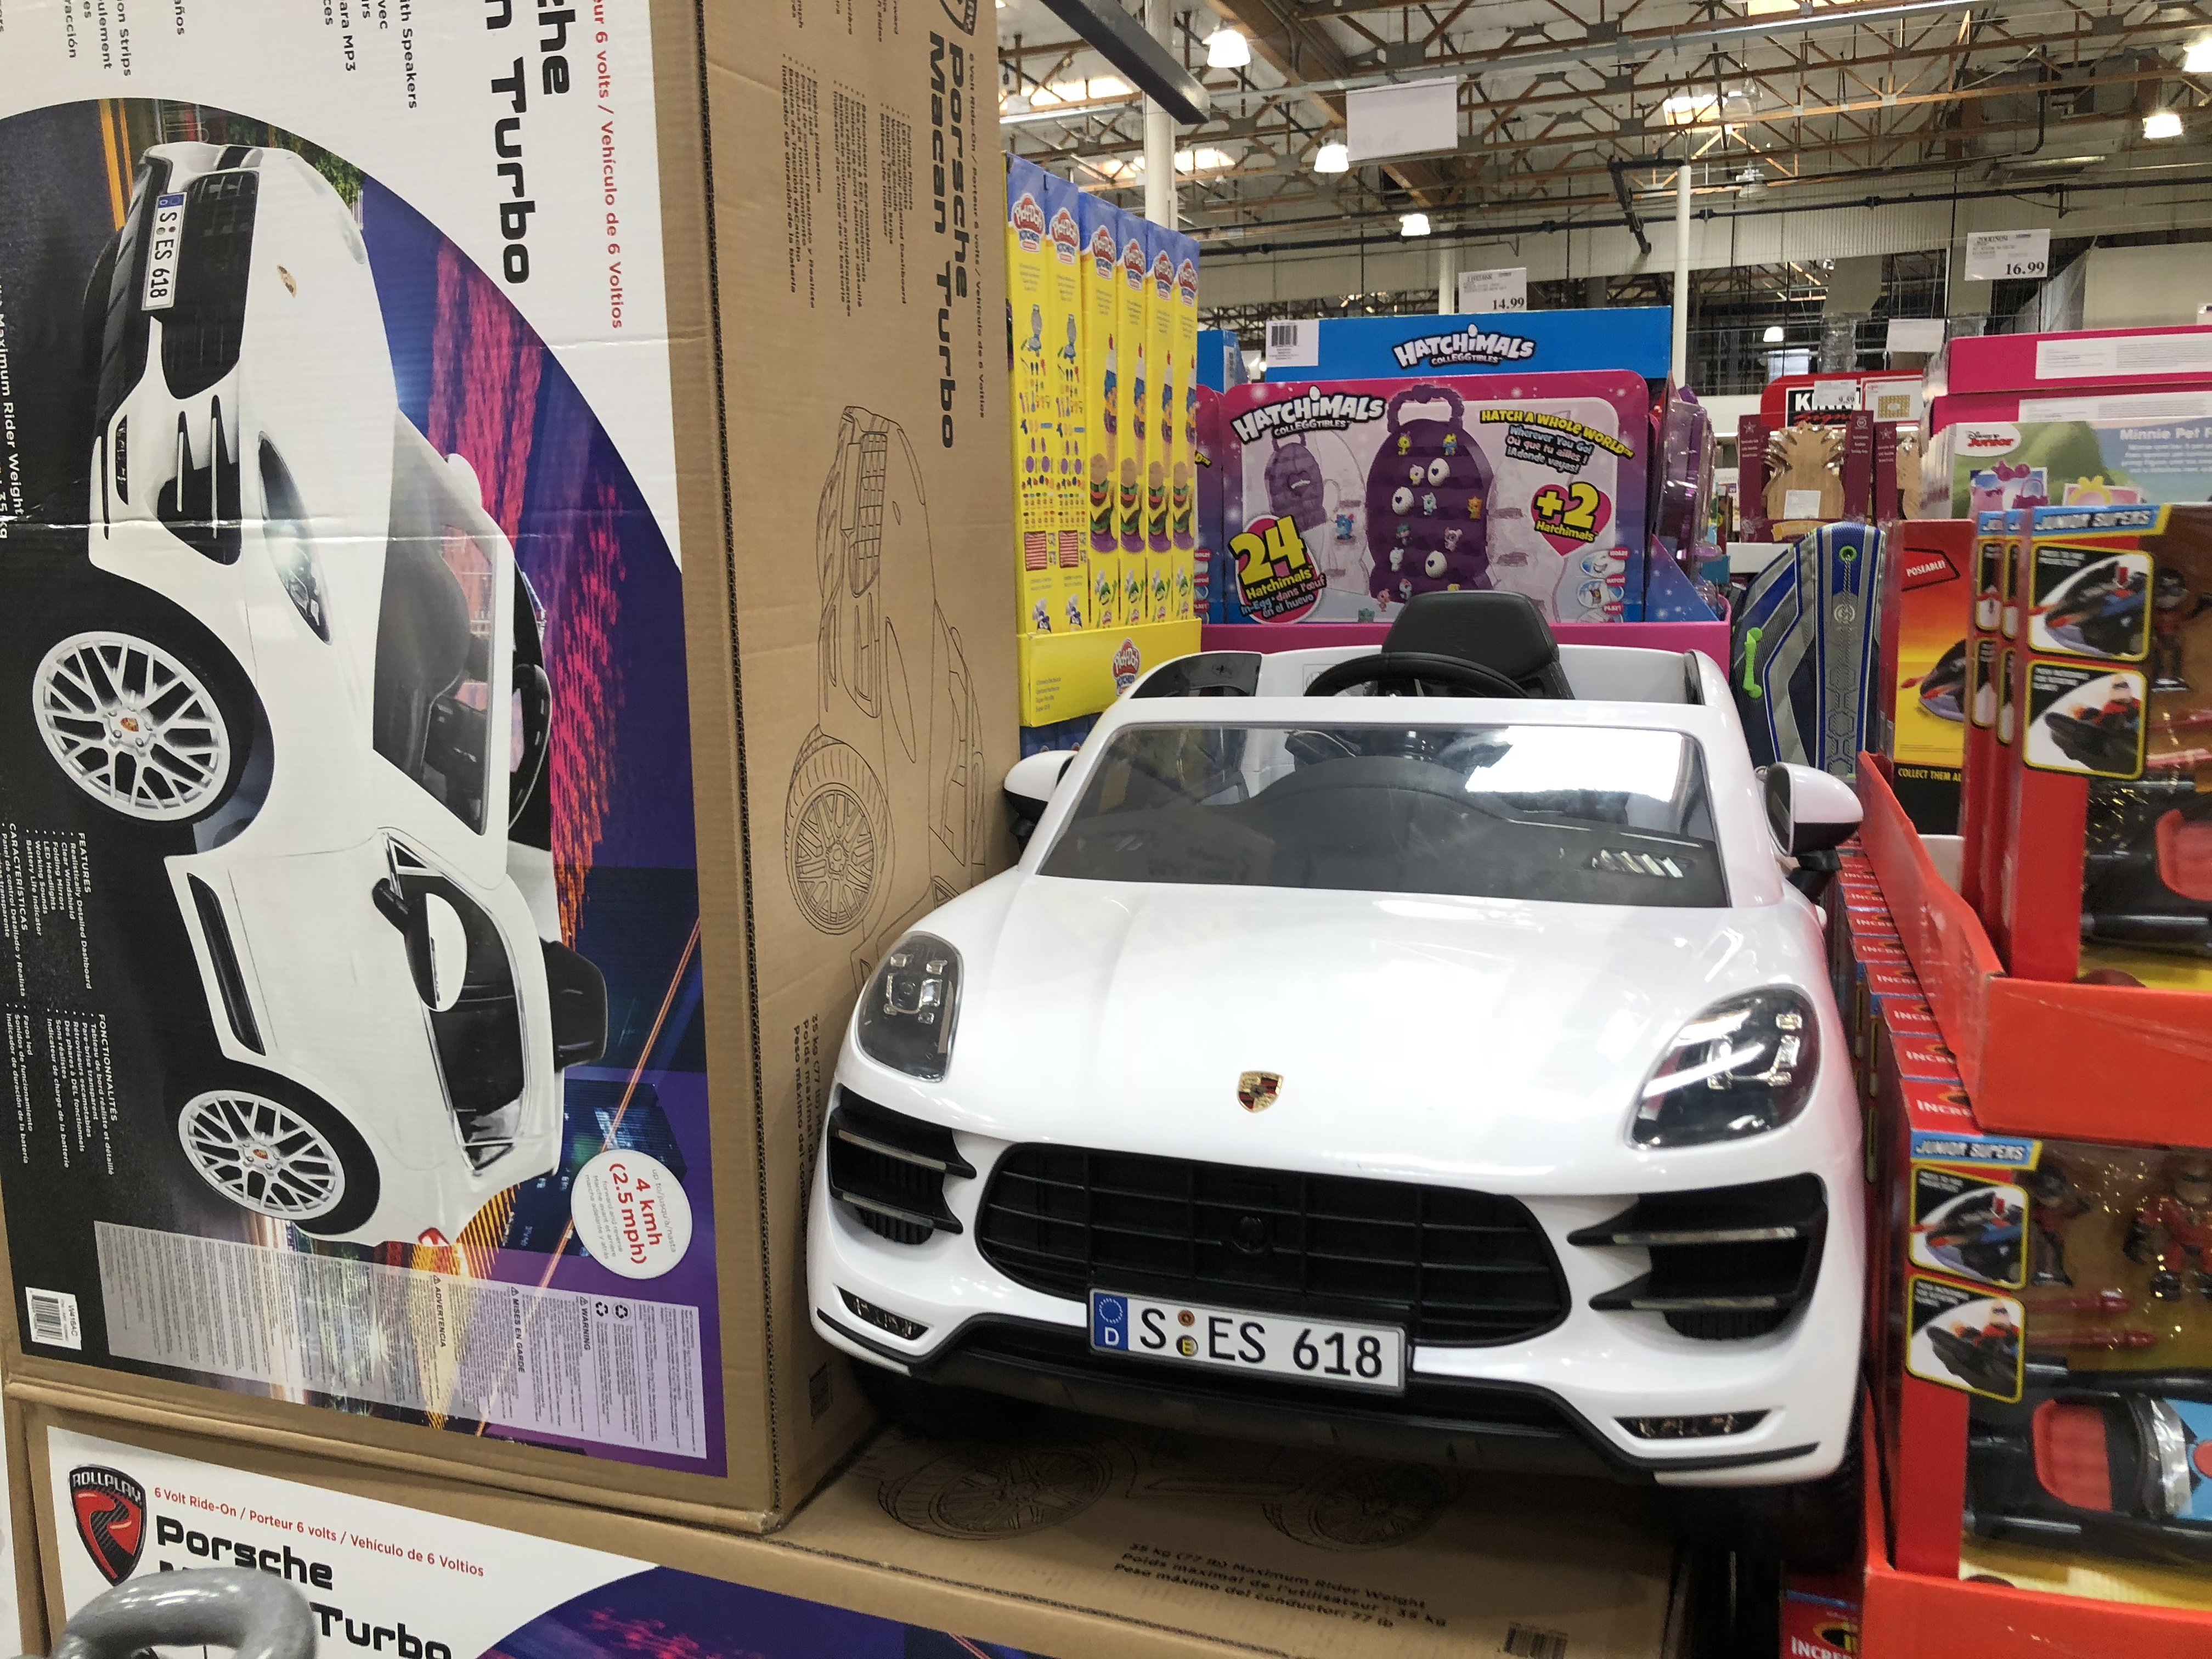 The best holiday toy deals for 2018 include the Porsche Ride-On at Costco